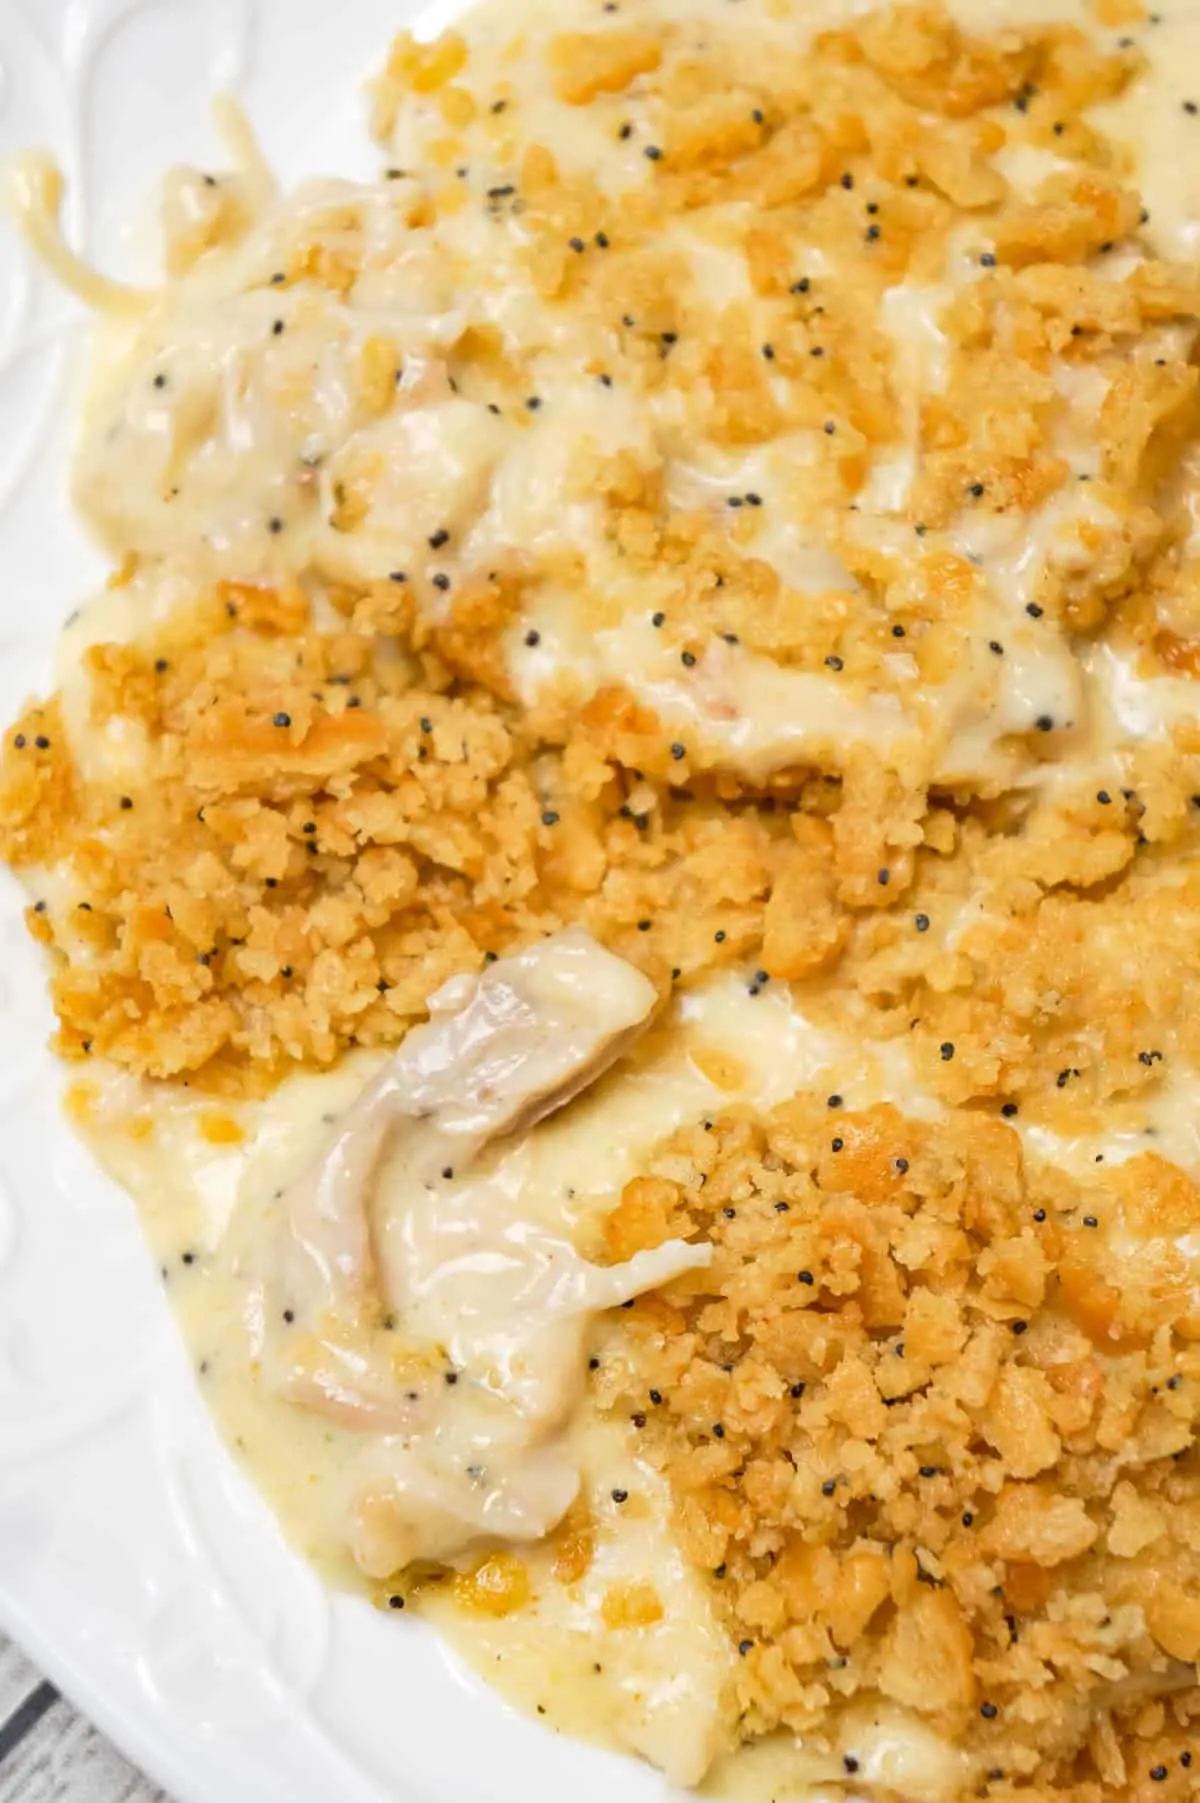 Poppy Seed Chicken Casserole is an easy dinner recipe loaded with shredded chicken, cream of chicken soup, shredded cheese and poppy seeds and topped with crumbled Ritz crackers.